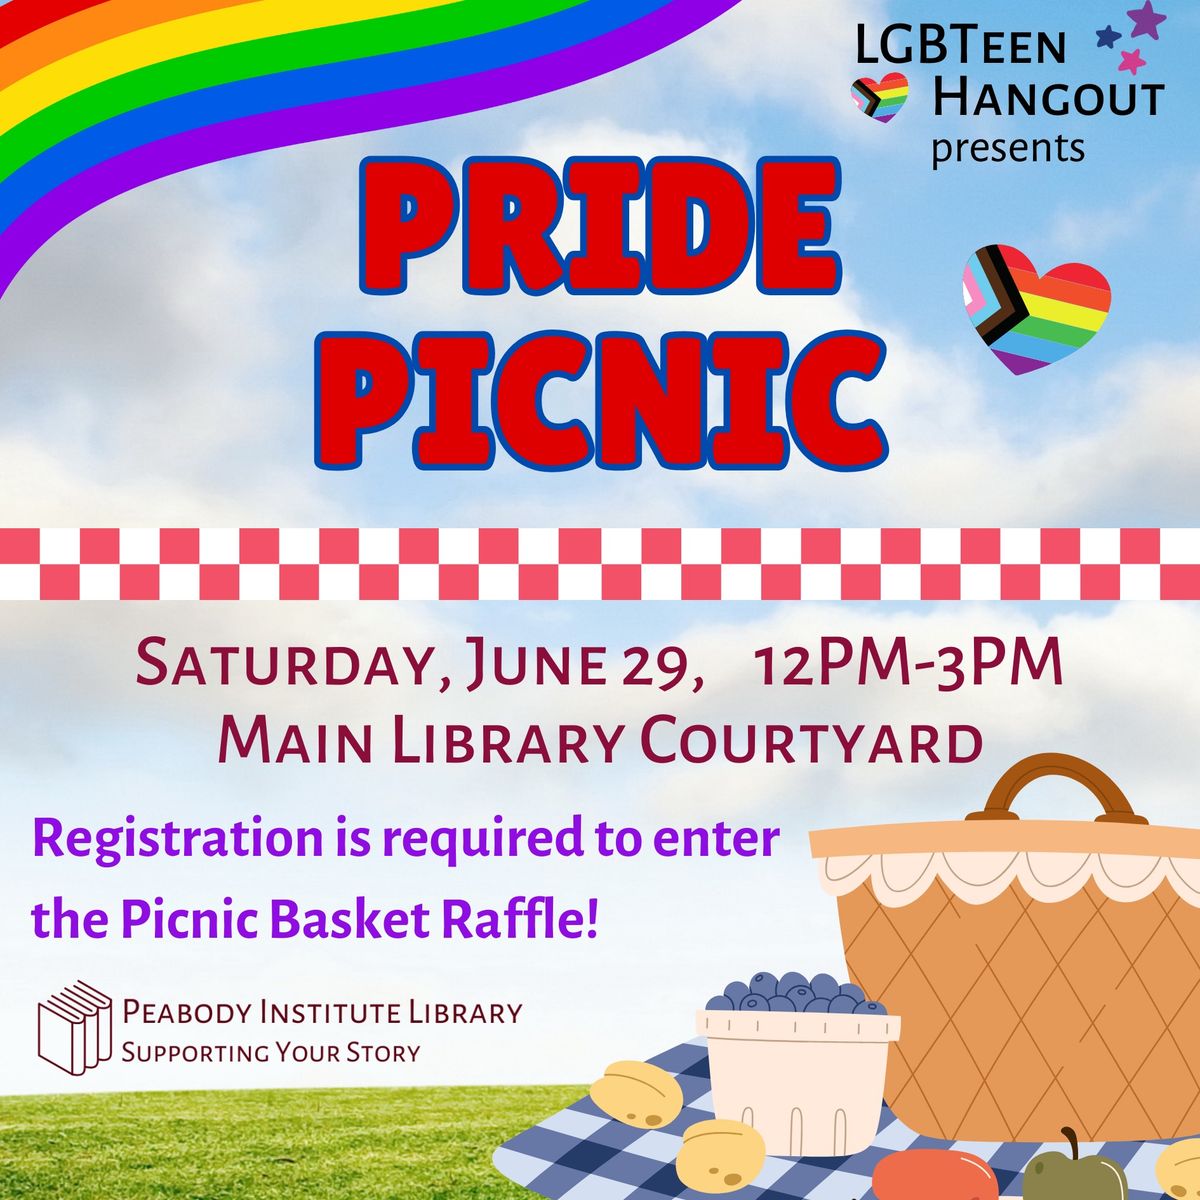 Pride Picnic at the Peabody Institute Library